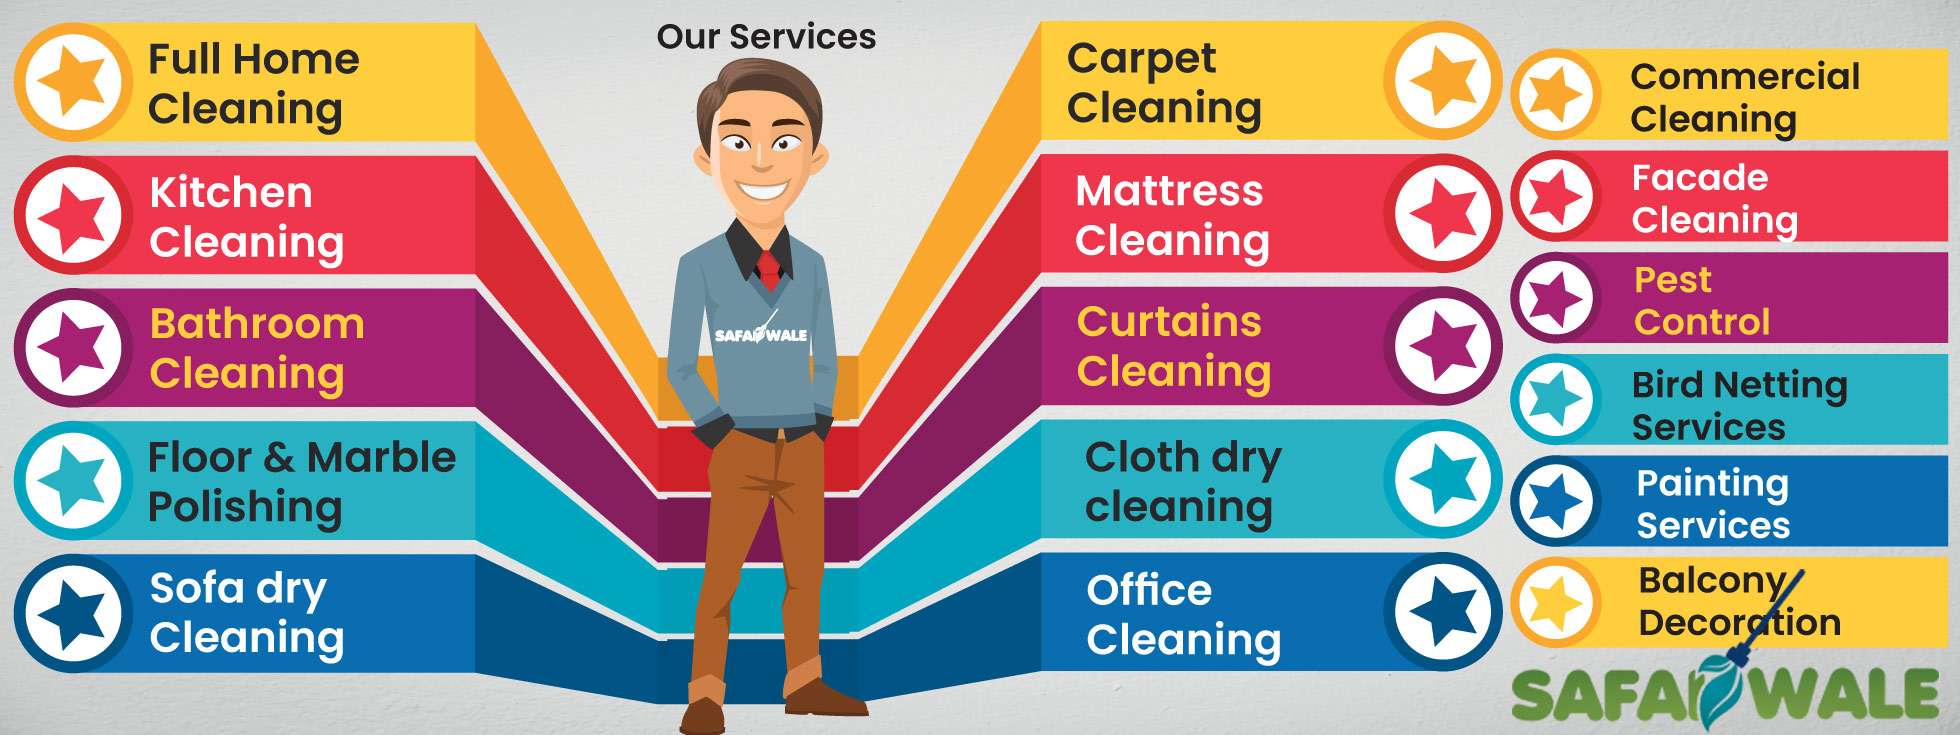 Full Home Cleaning Services Safaiwale